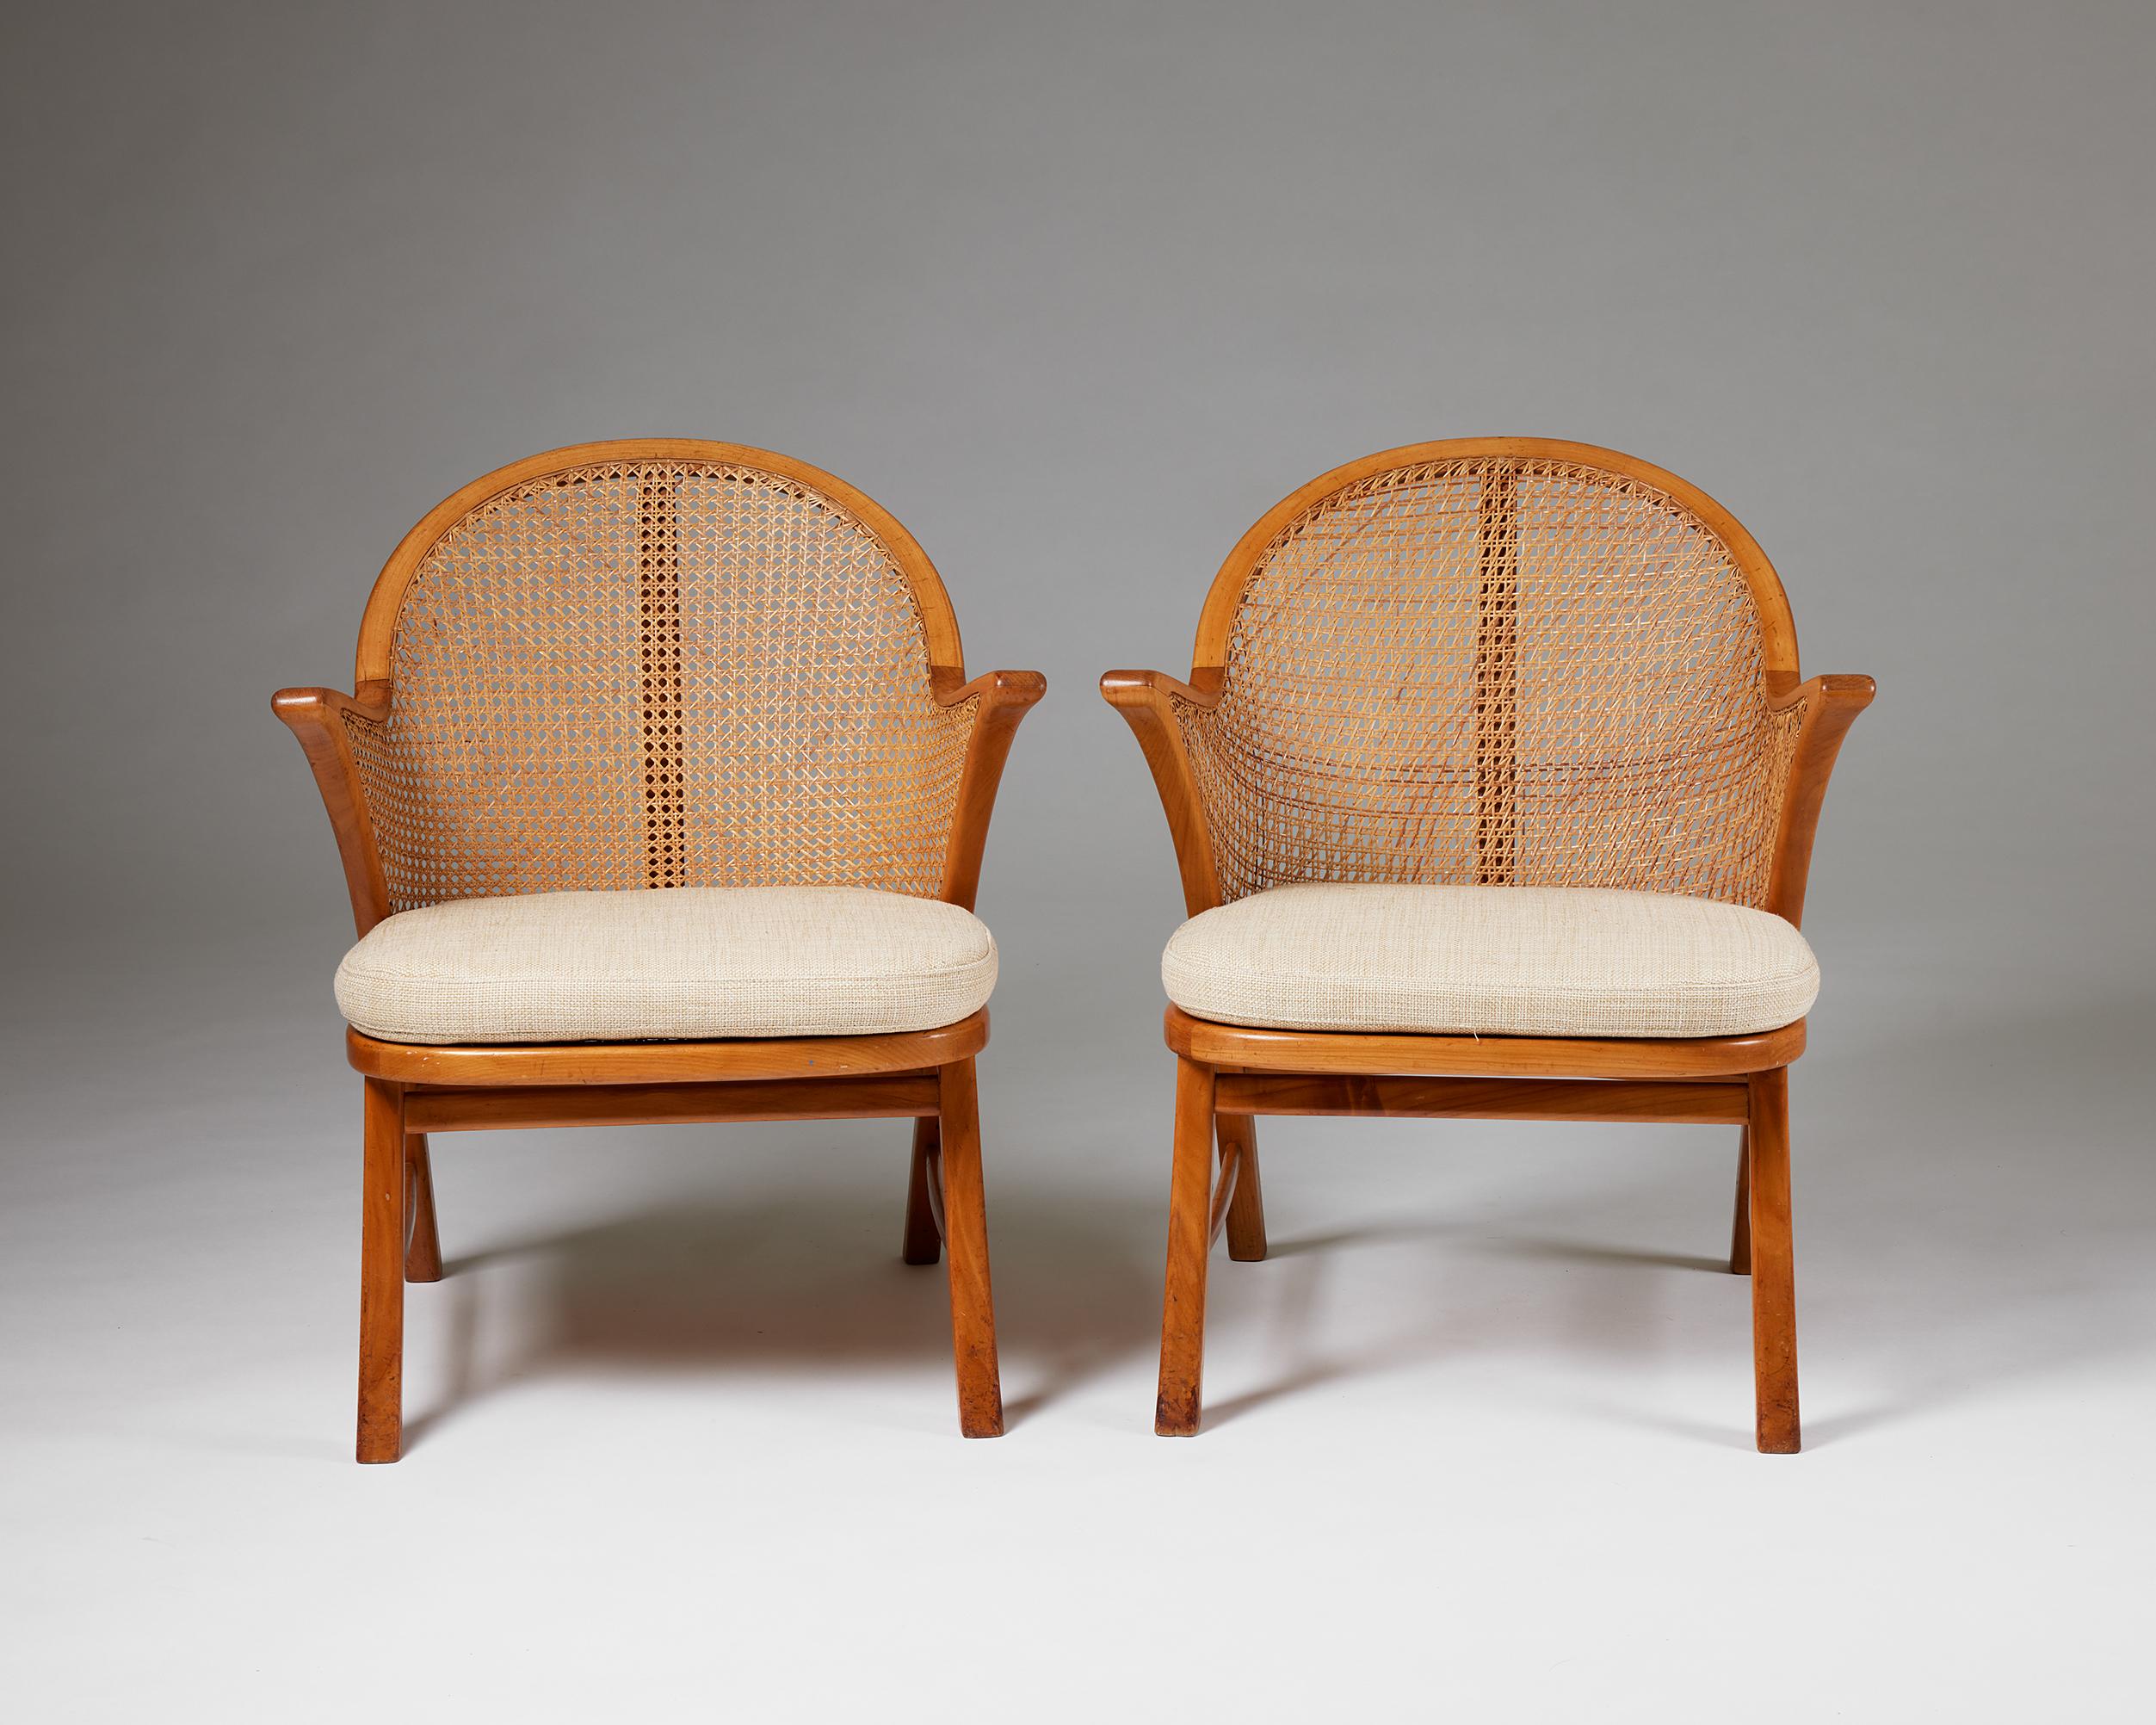 Danish Pair of Armchairs Attributed to Frits Schlegel, Denmark, 1930s-1940s